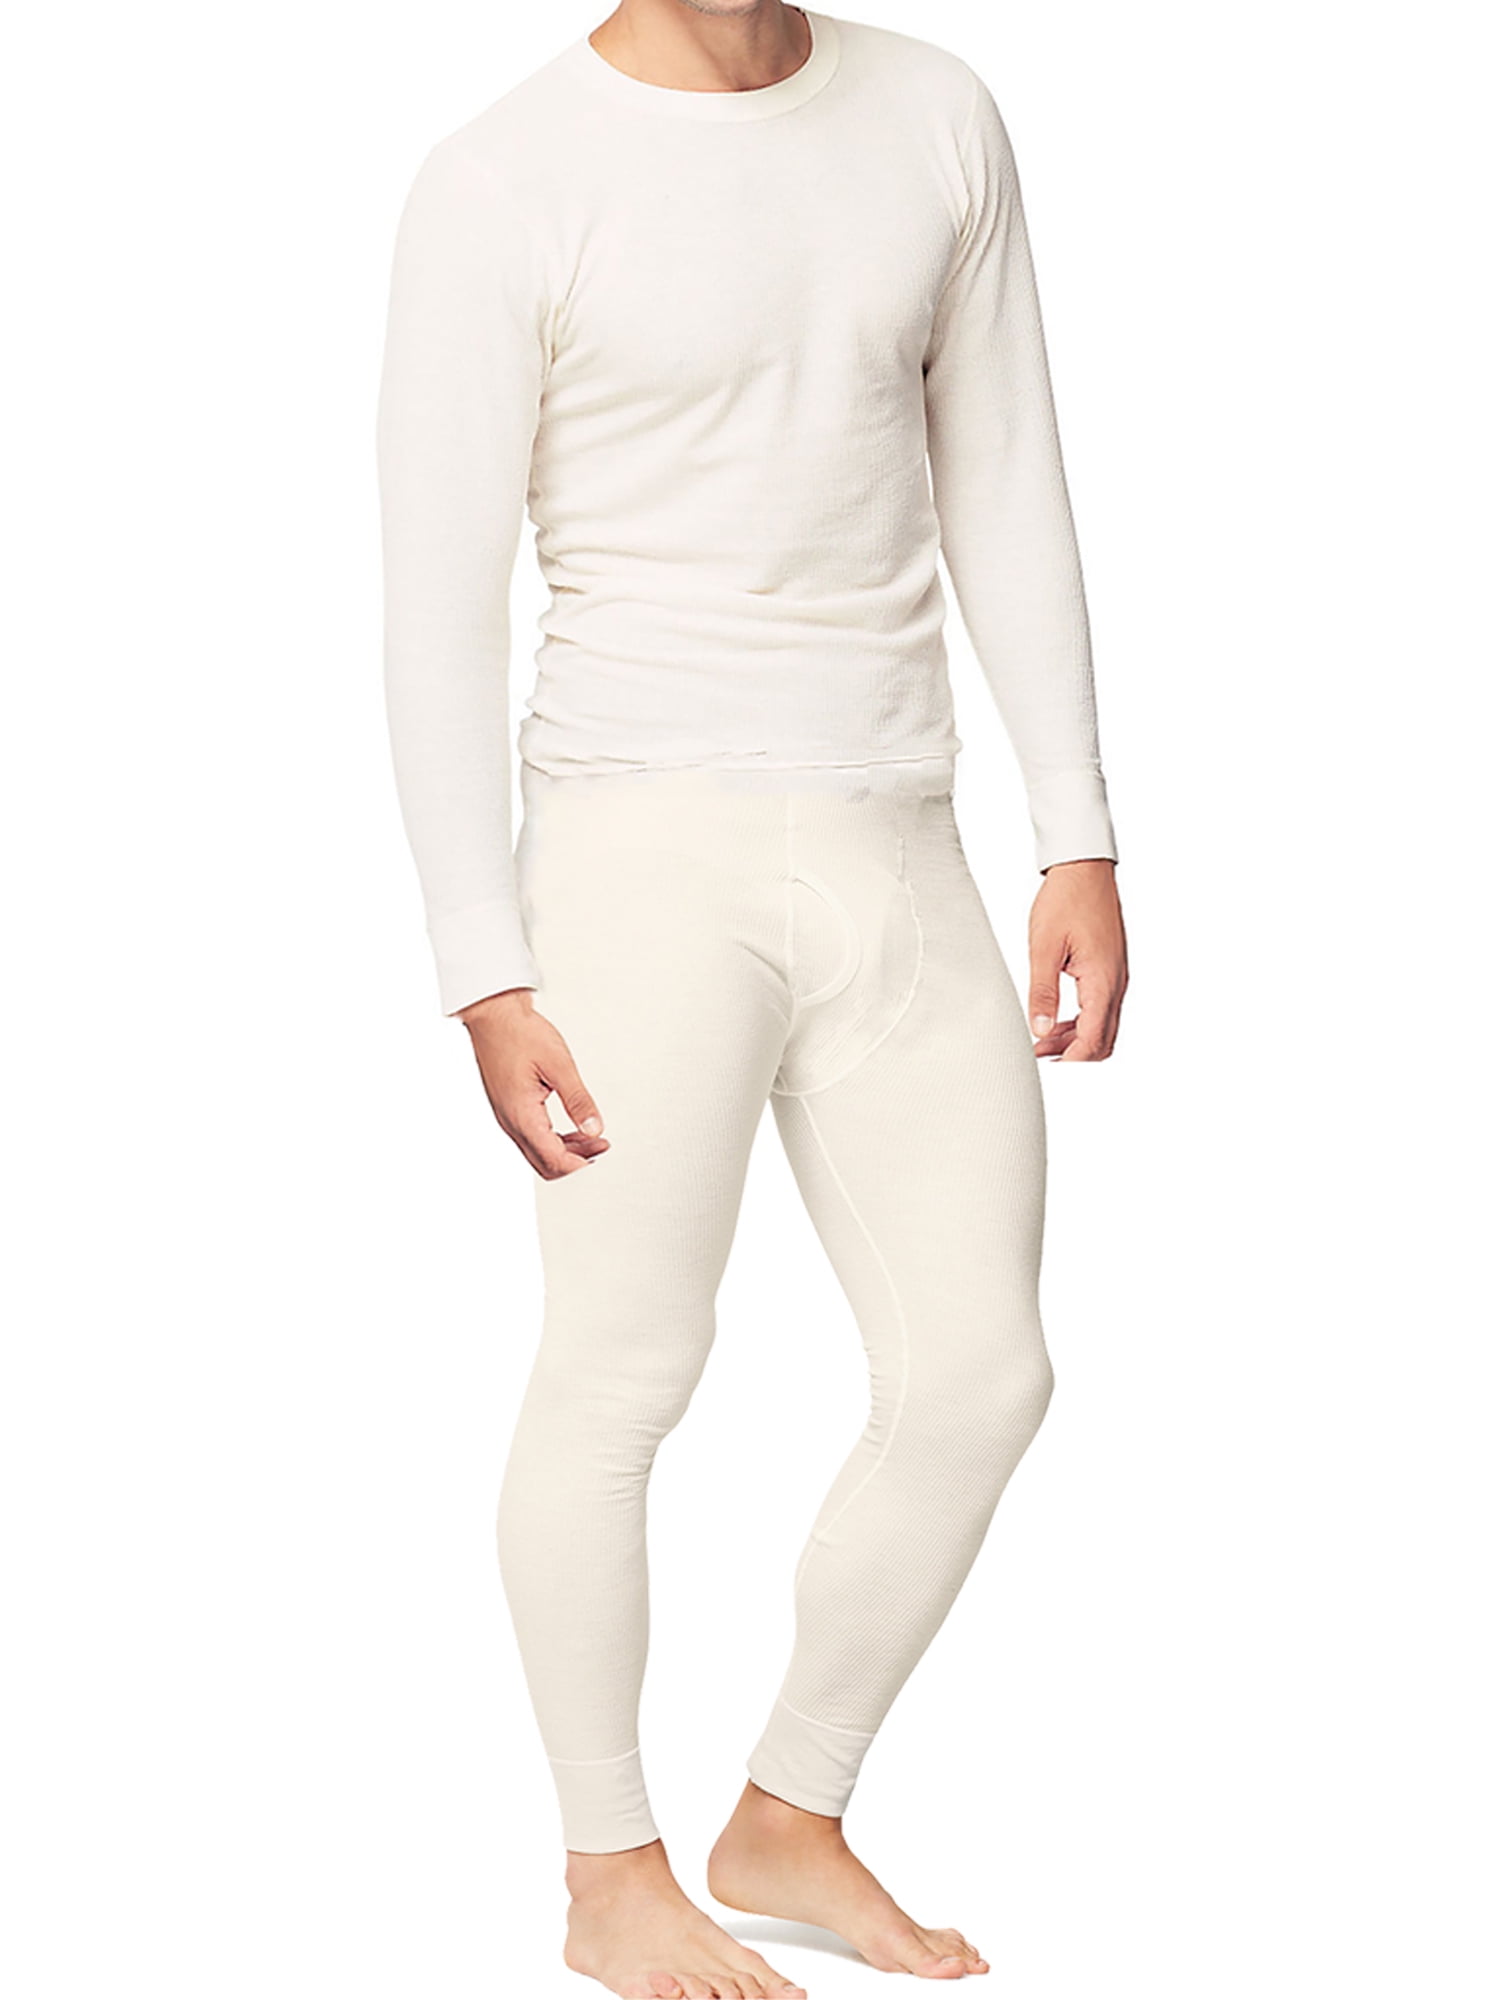 NEW MENS THERMAL LONG JOHNS & LONG SLEEVE TOP UNDERWEAR *4 COLOURS/4 SIZES* 